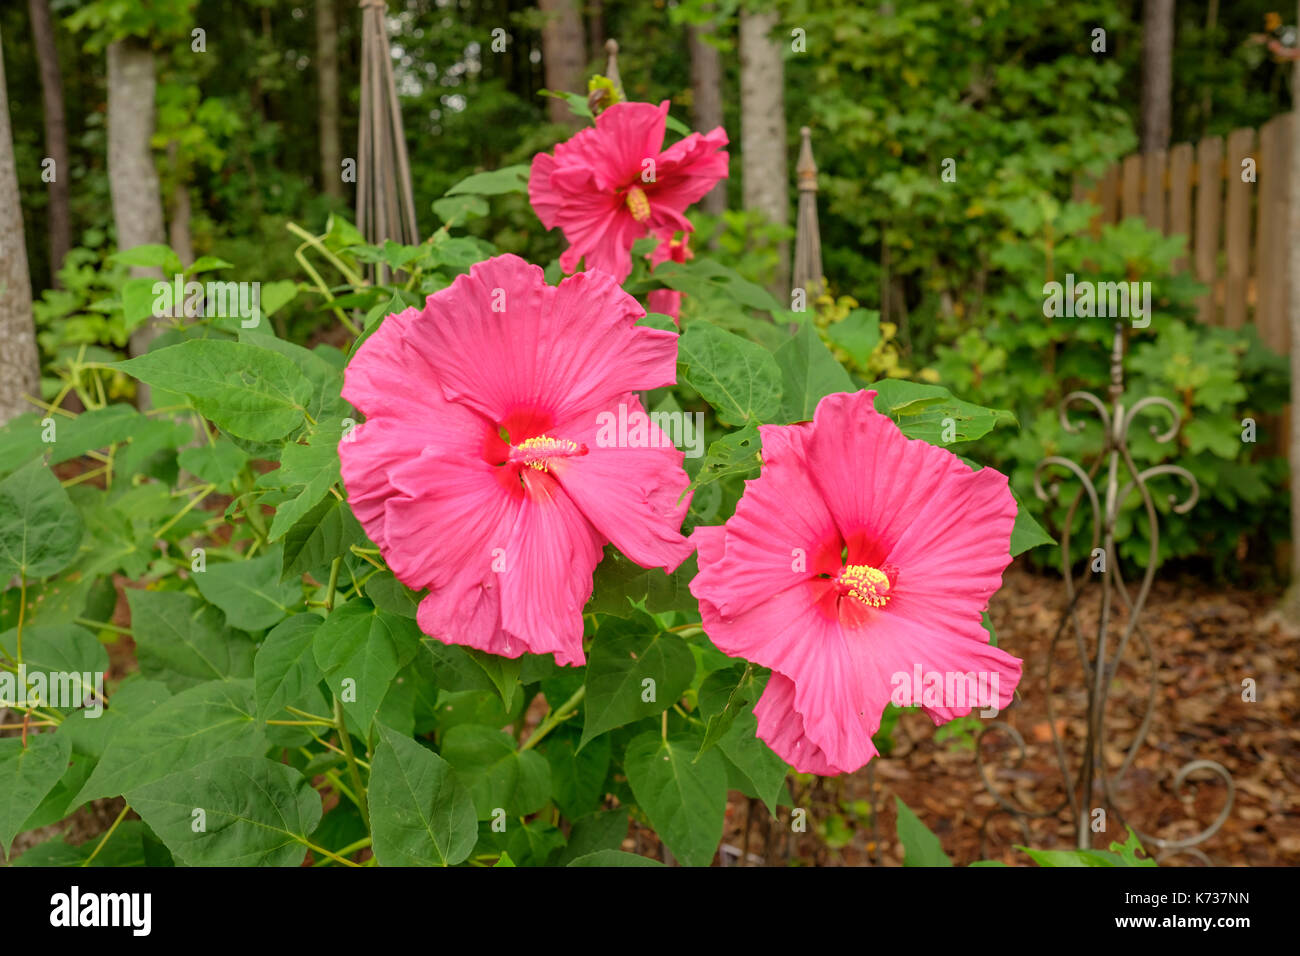 Giant pink hibiscus plant, or hibiscus moscheutos, flowering and growing in an Alabama garden, United States. Stock Photo